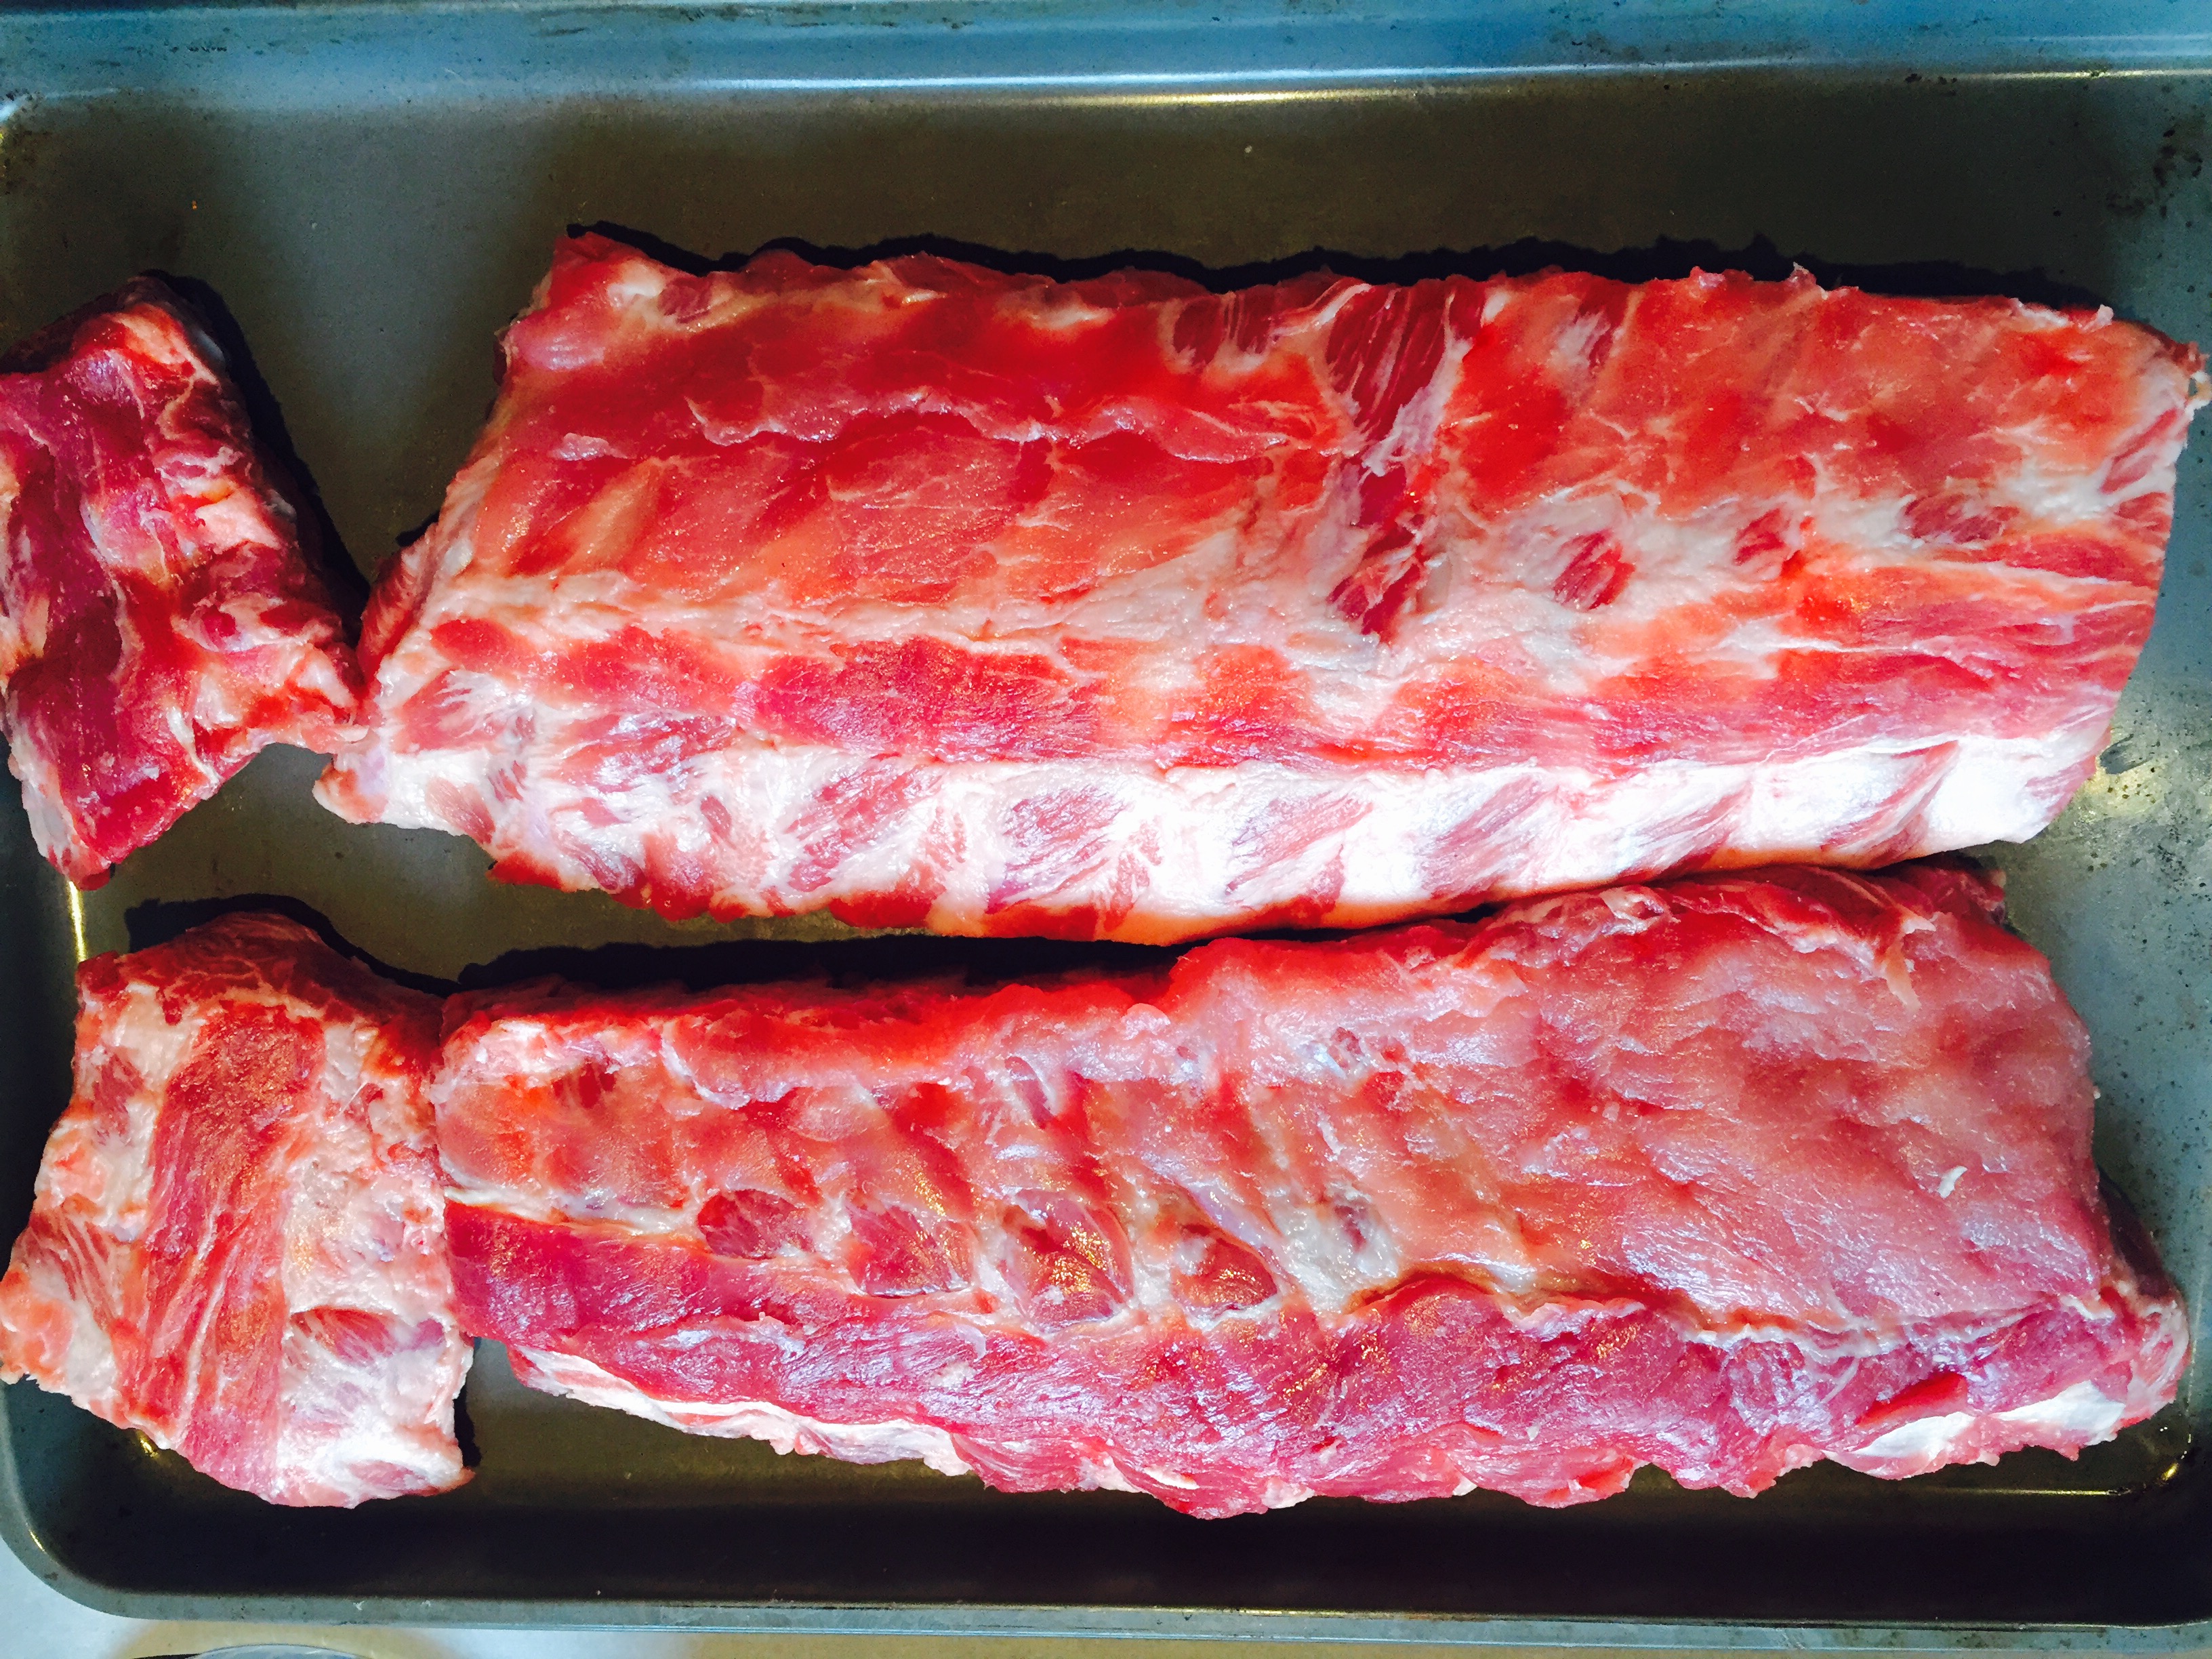 Trimmed baby back pork ribs to make my BBQ'd baked ribs